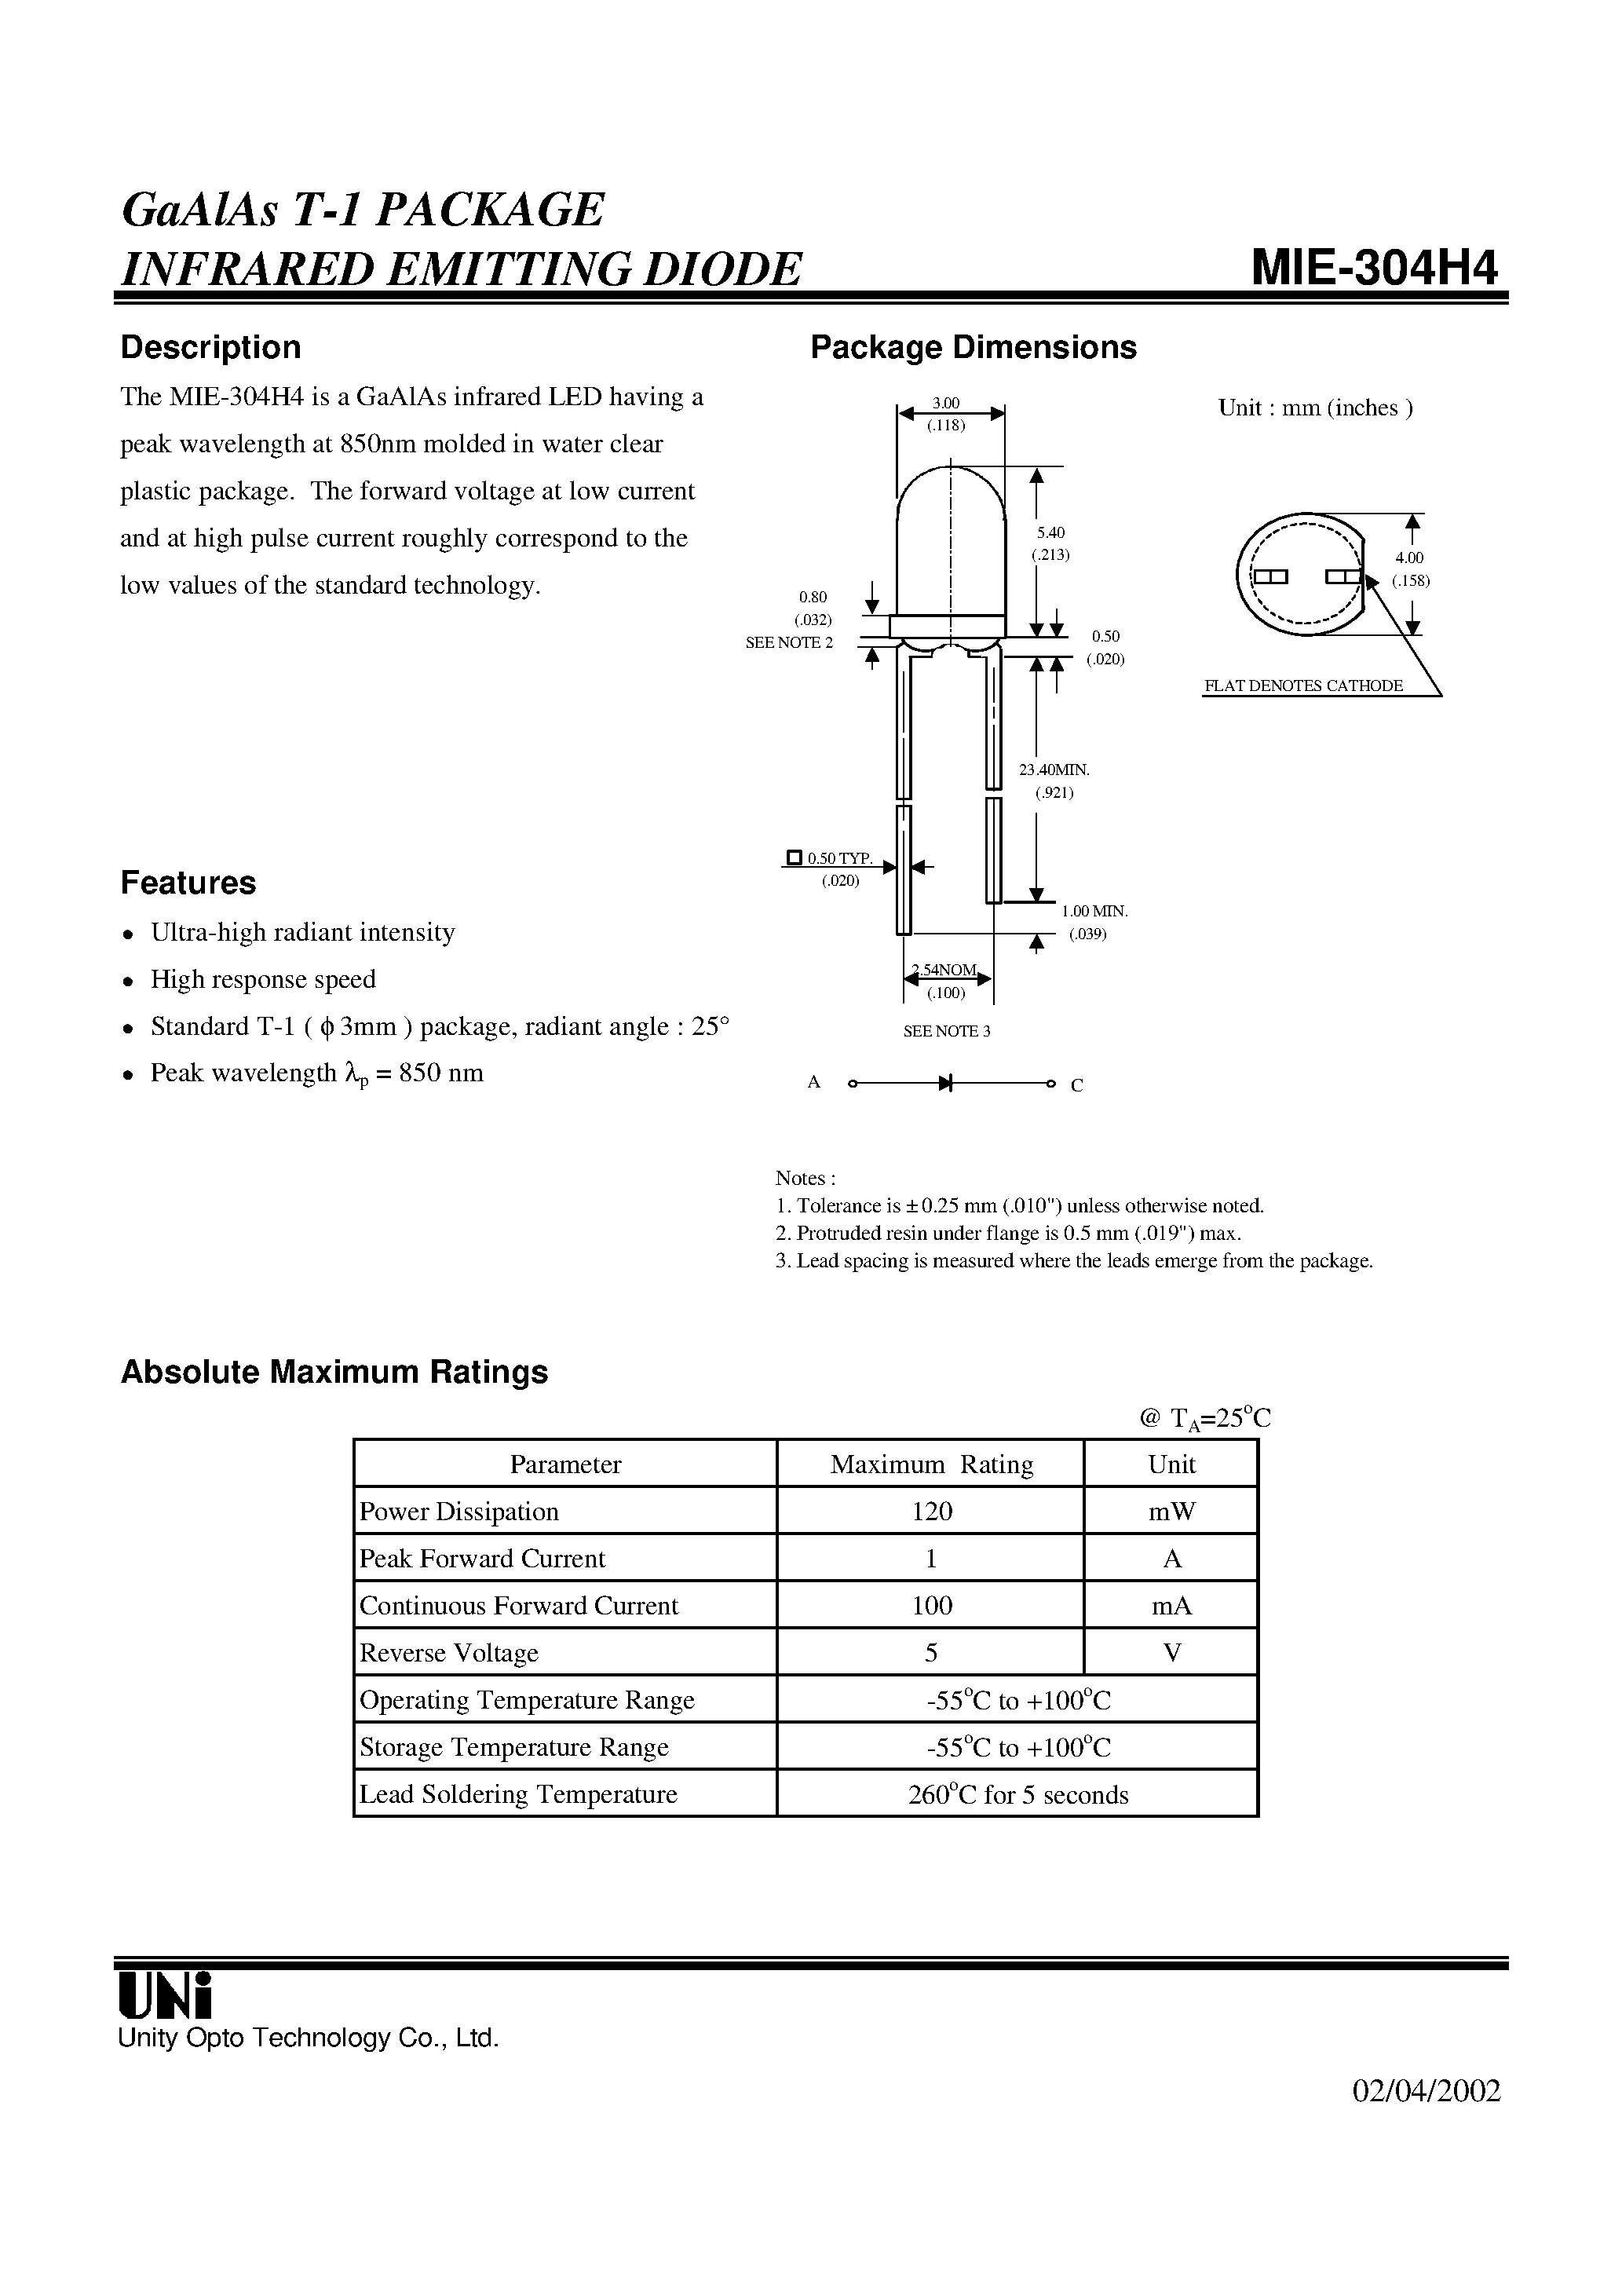 Datasheet MIE-304H4 - GaAlAs T-1 PACKAGE INFRARED EMITTING DIODE page 1